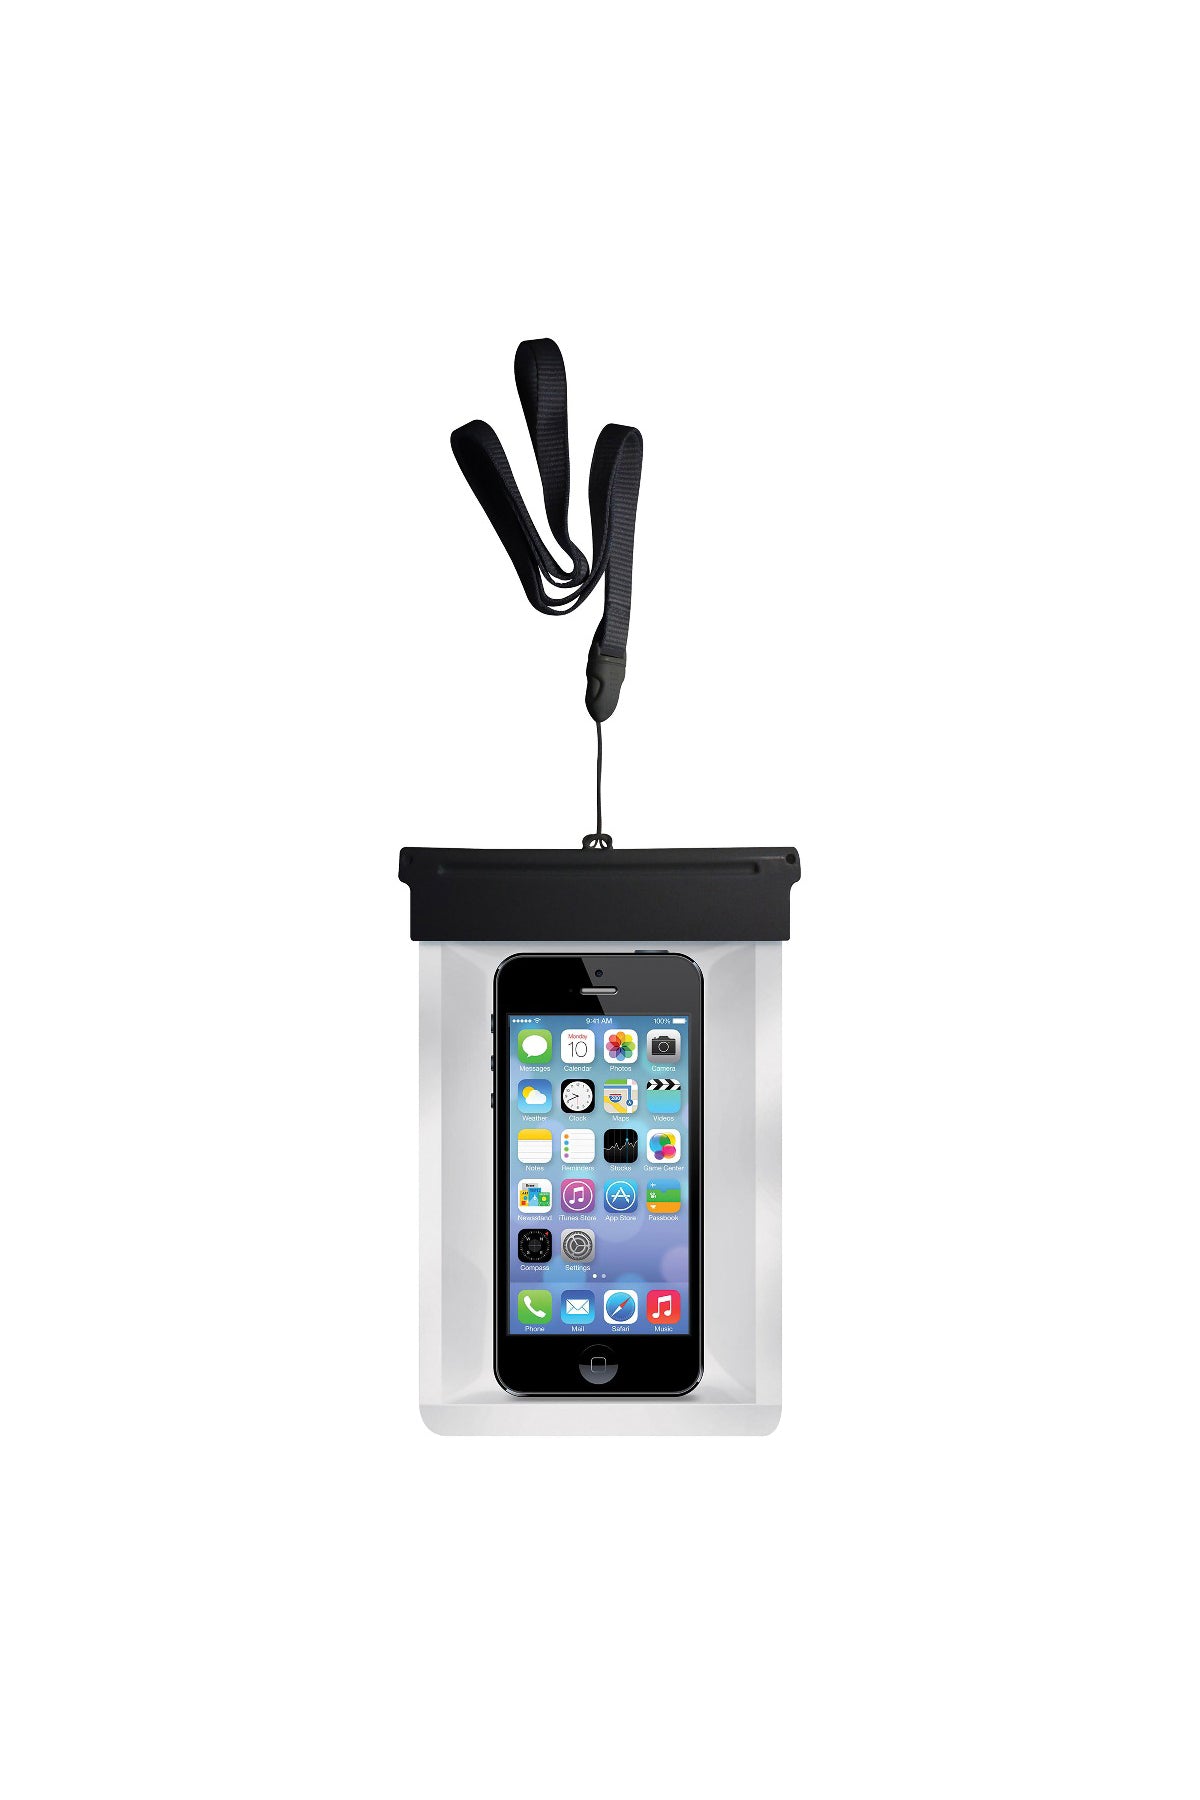 All Weather Dri Pouch Smart Phone